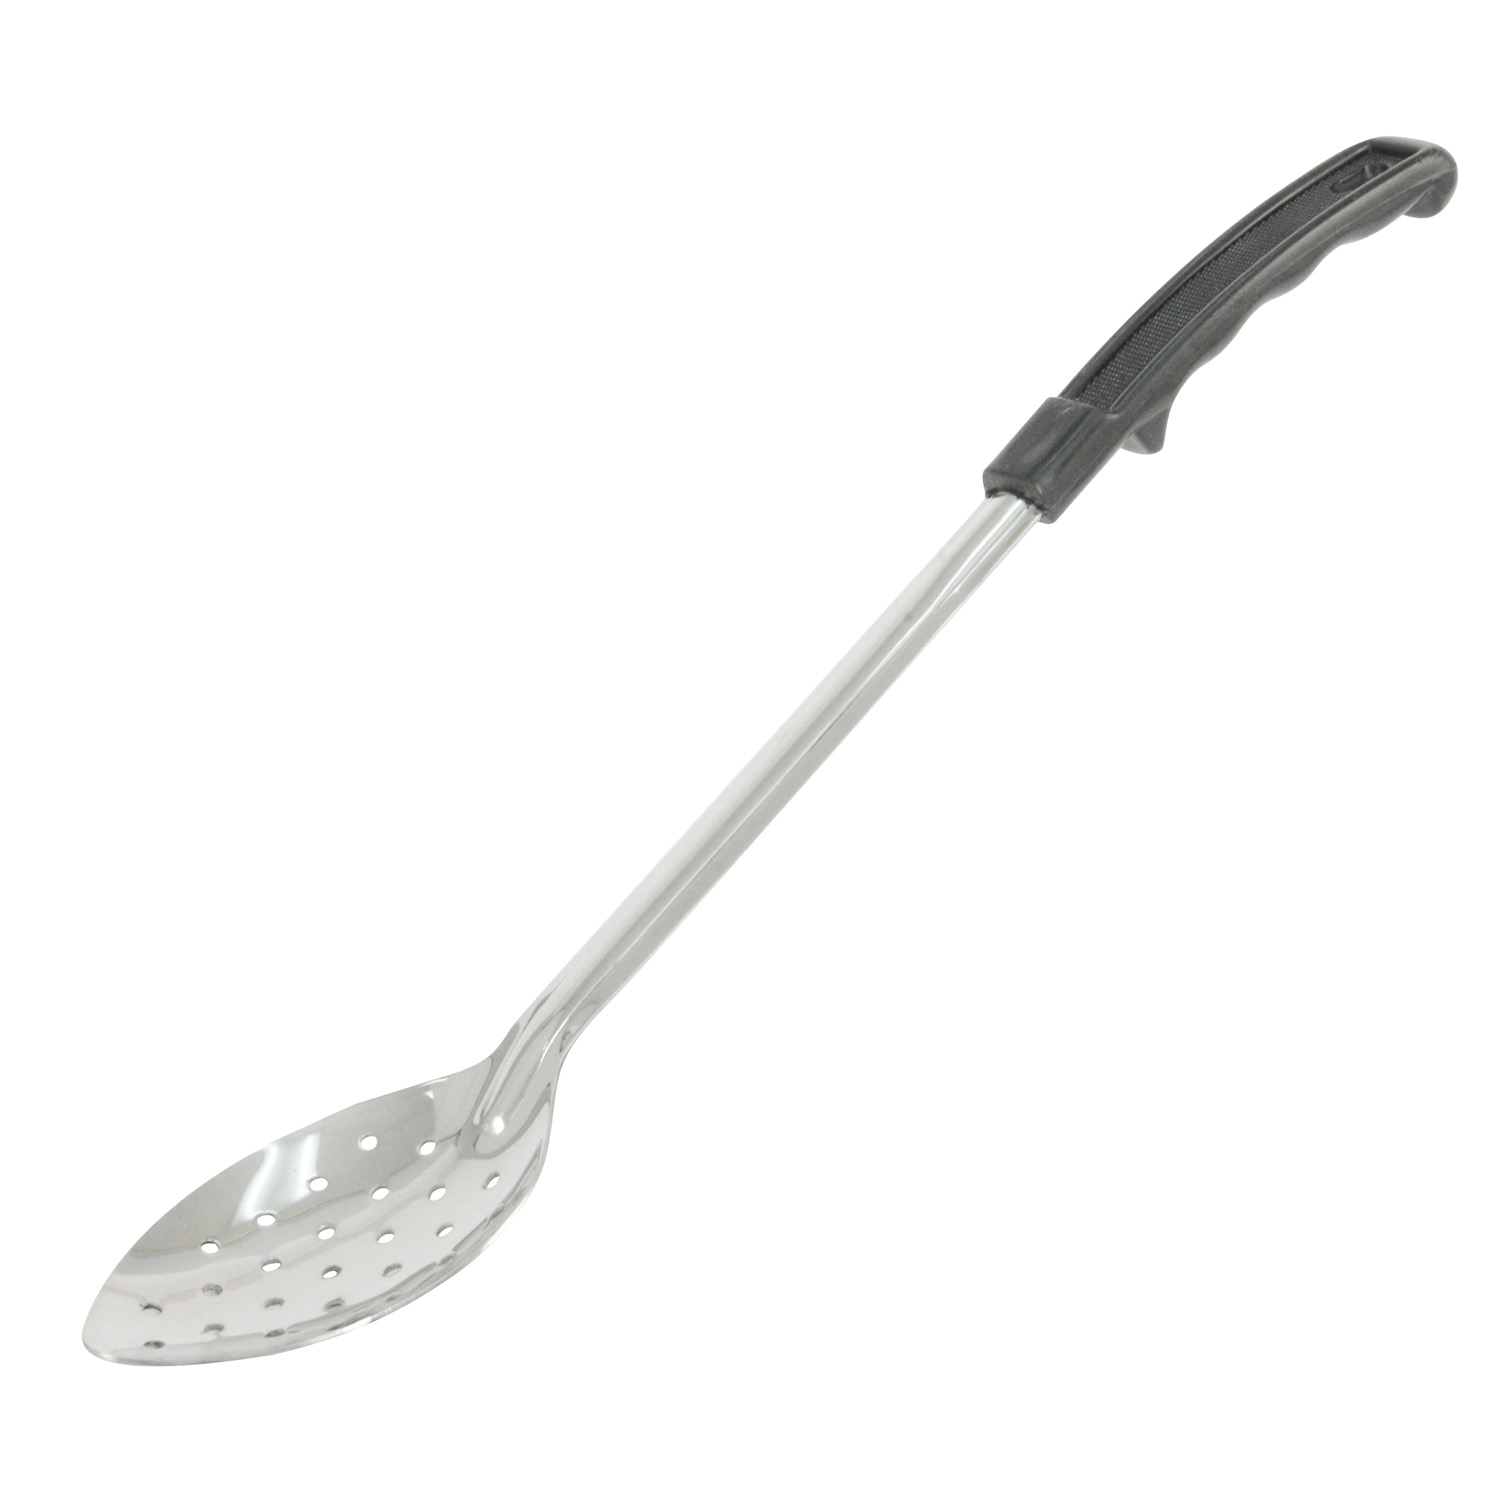 CAC China SBSP-13BH Perforated Stainless Steel Basting Spoon 1.2mm with Black Handle 13"